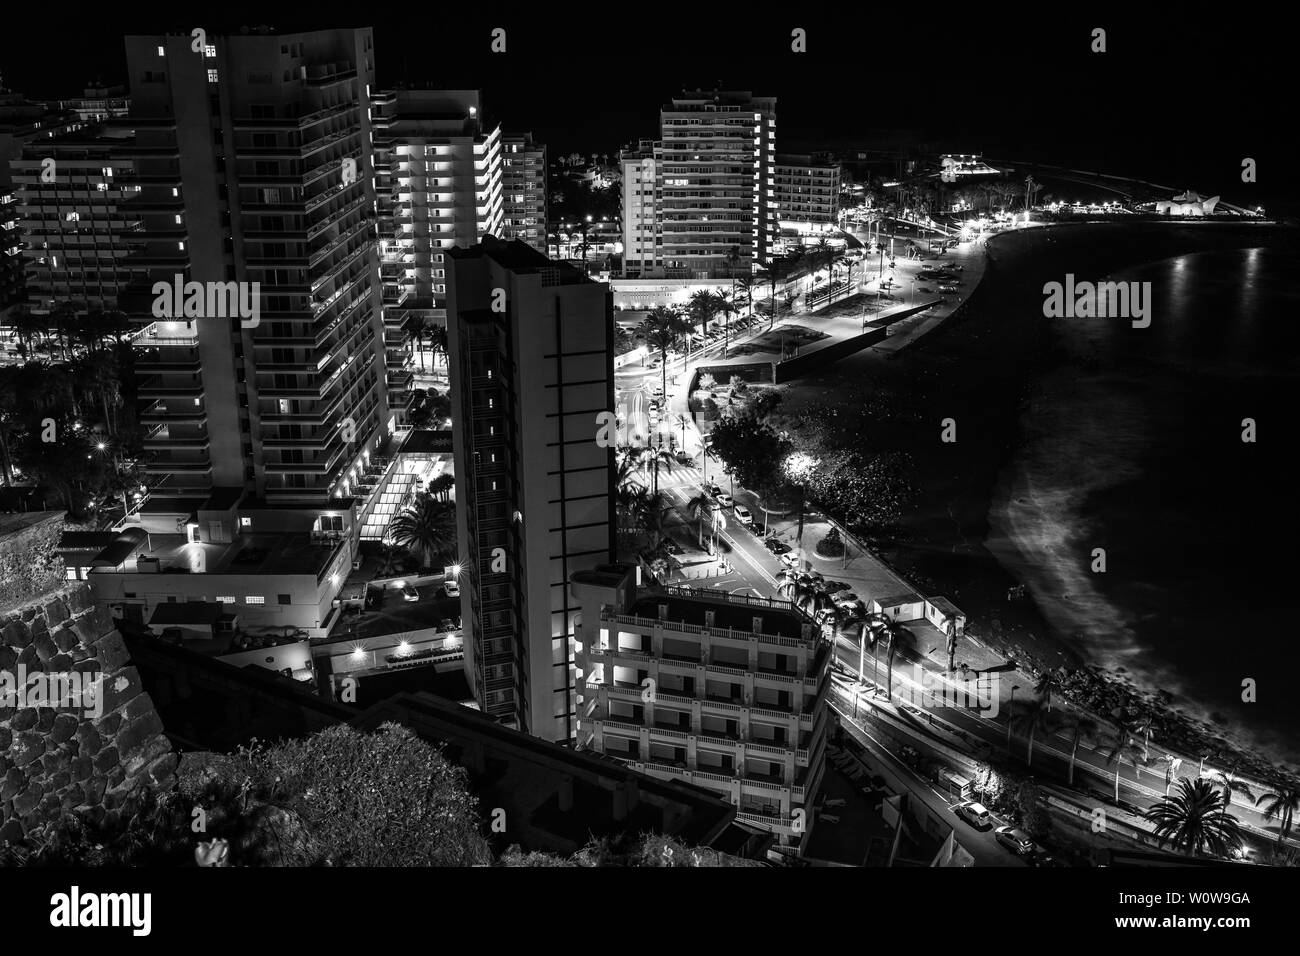 PUERTO DE LA CRUZ, CANARY ISLANDS, SPAIN - JULY 30, 2018: A view of the night city from a height. Viewpoint: Mirador La Paz. Black and White. Stock Photo